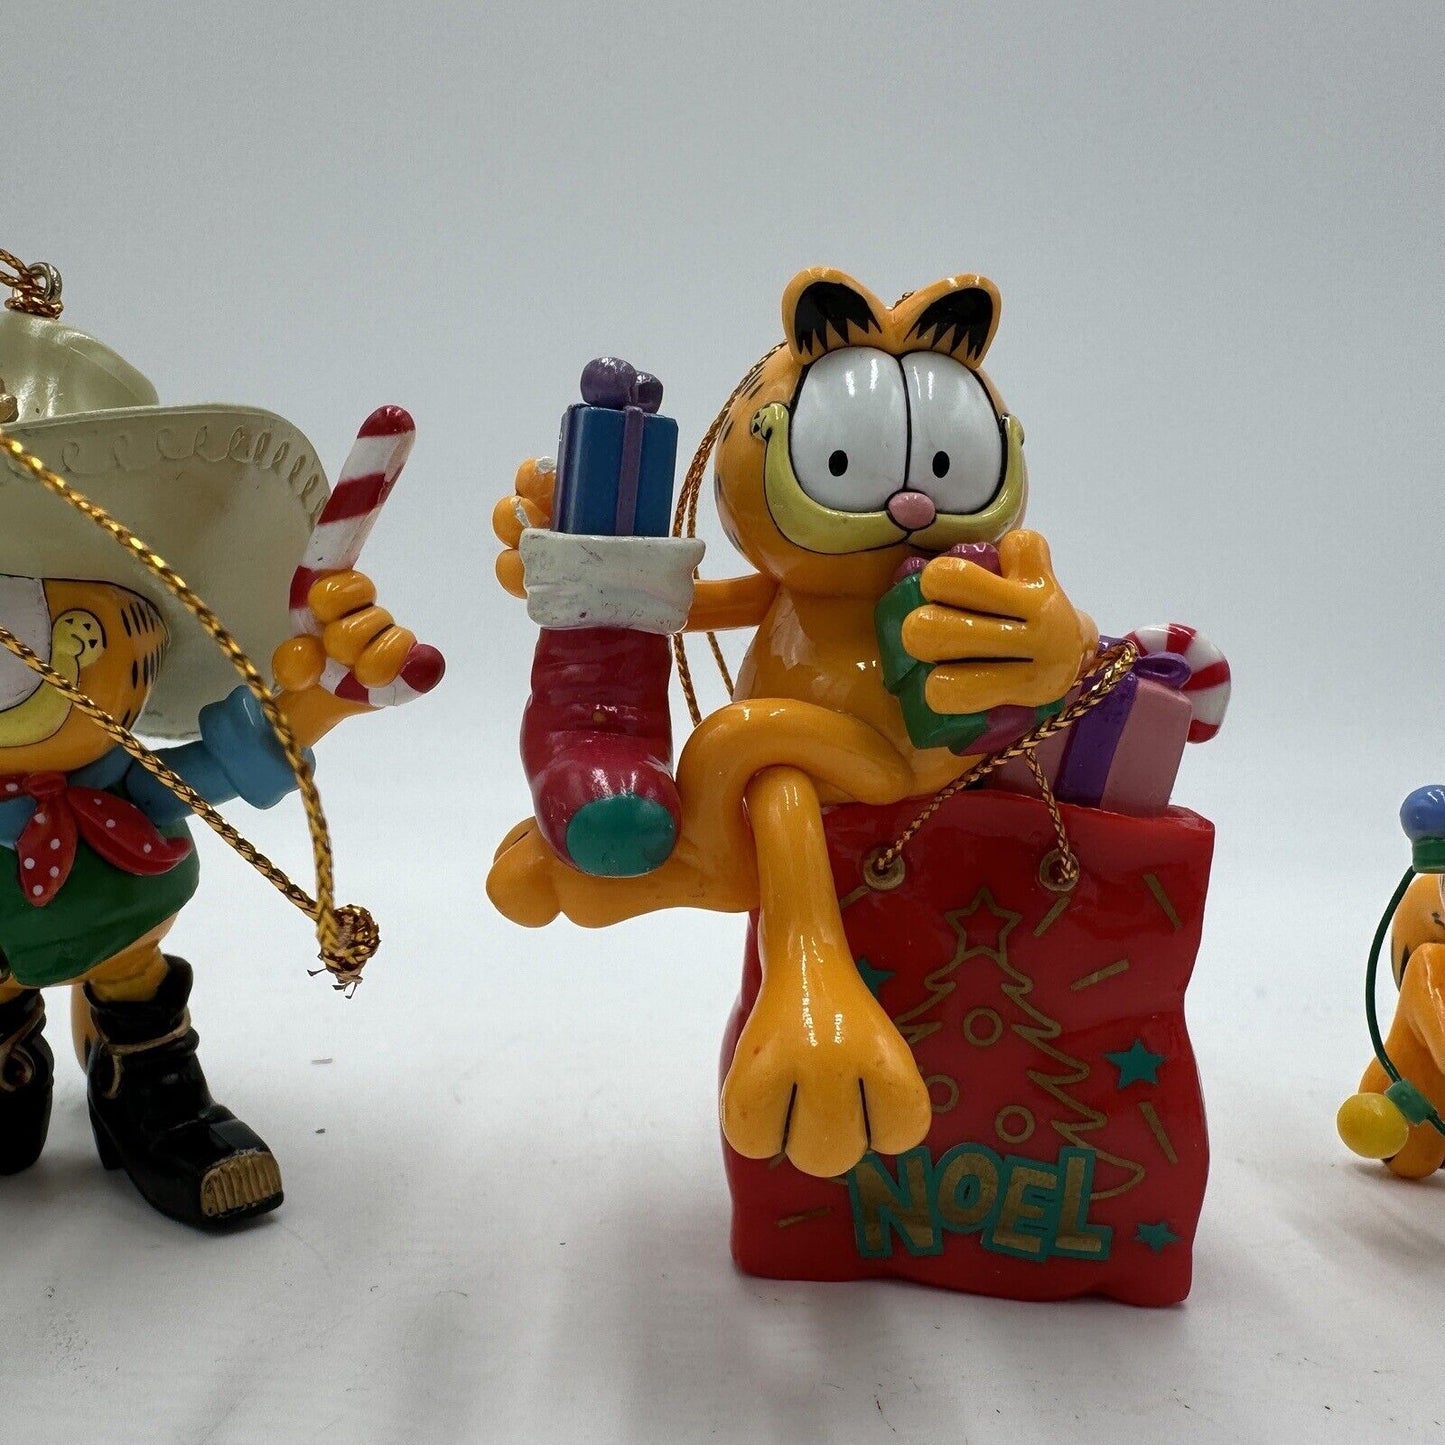 Vintage paws Garfield Christmas Ornaments Figurines 1996 3 Pieces